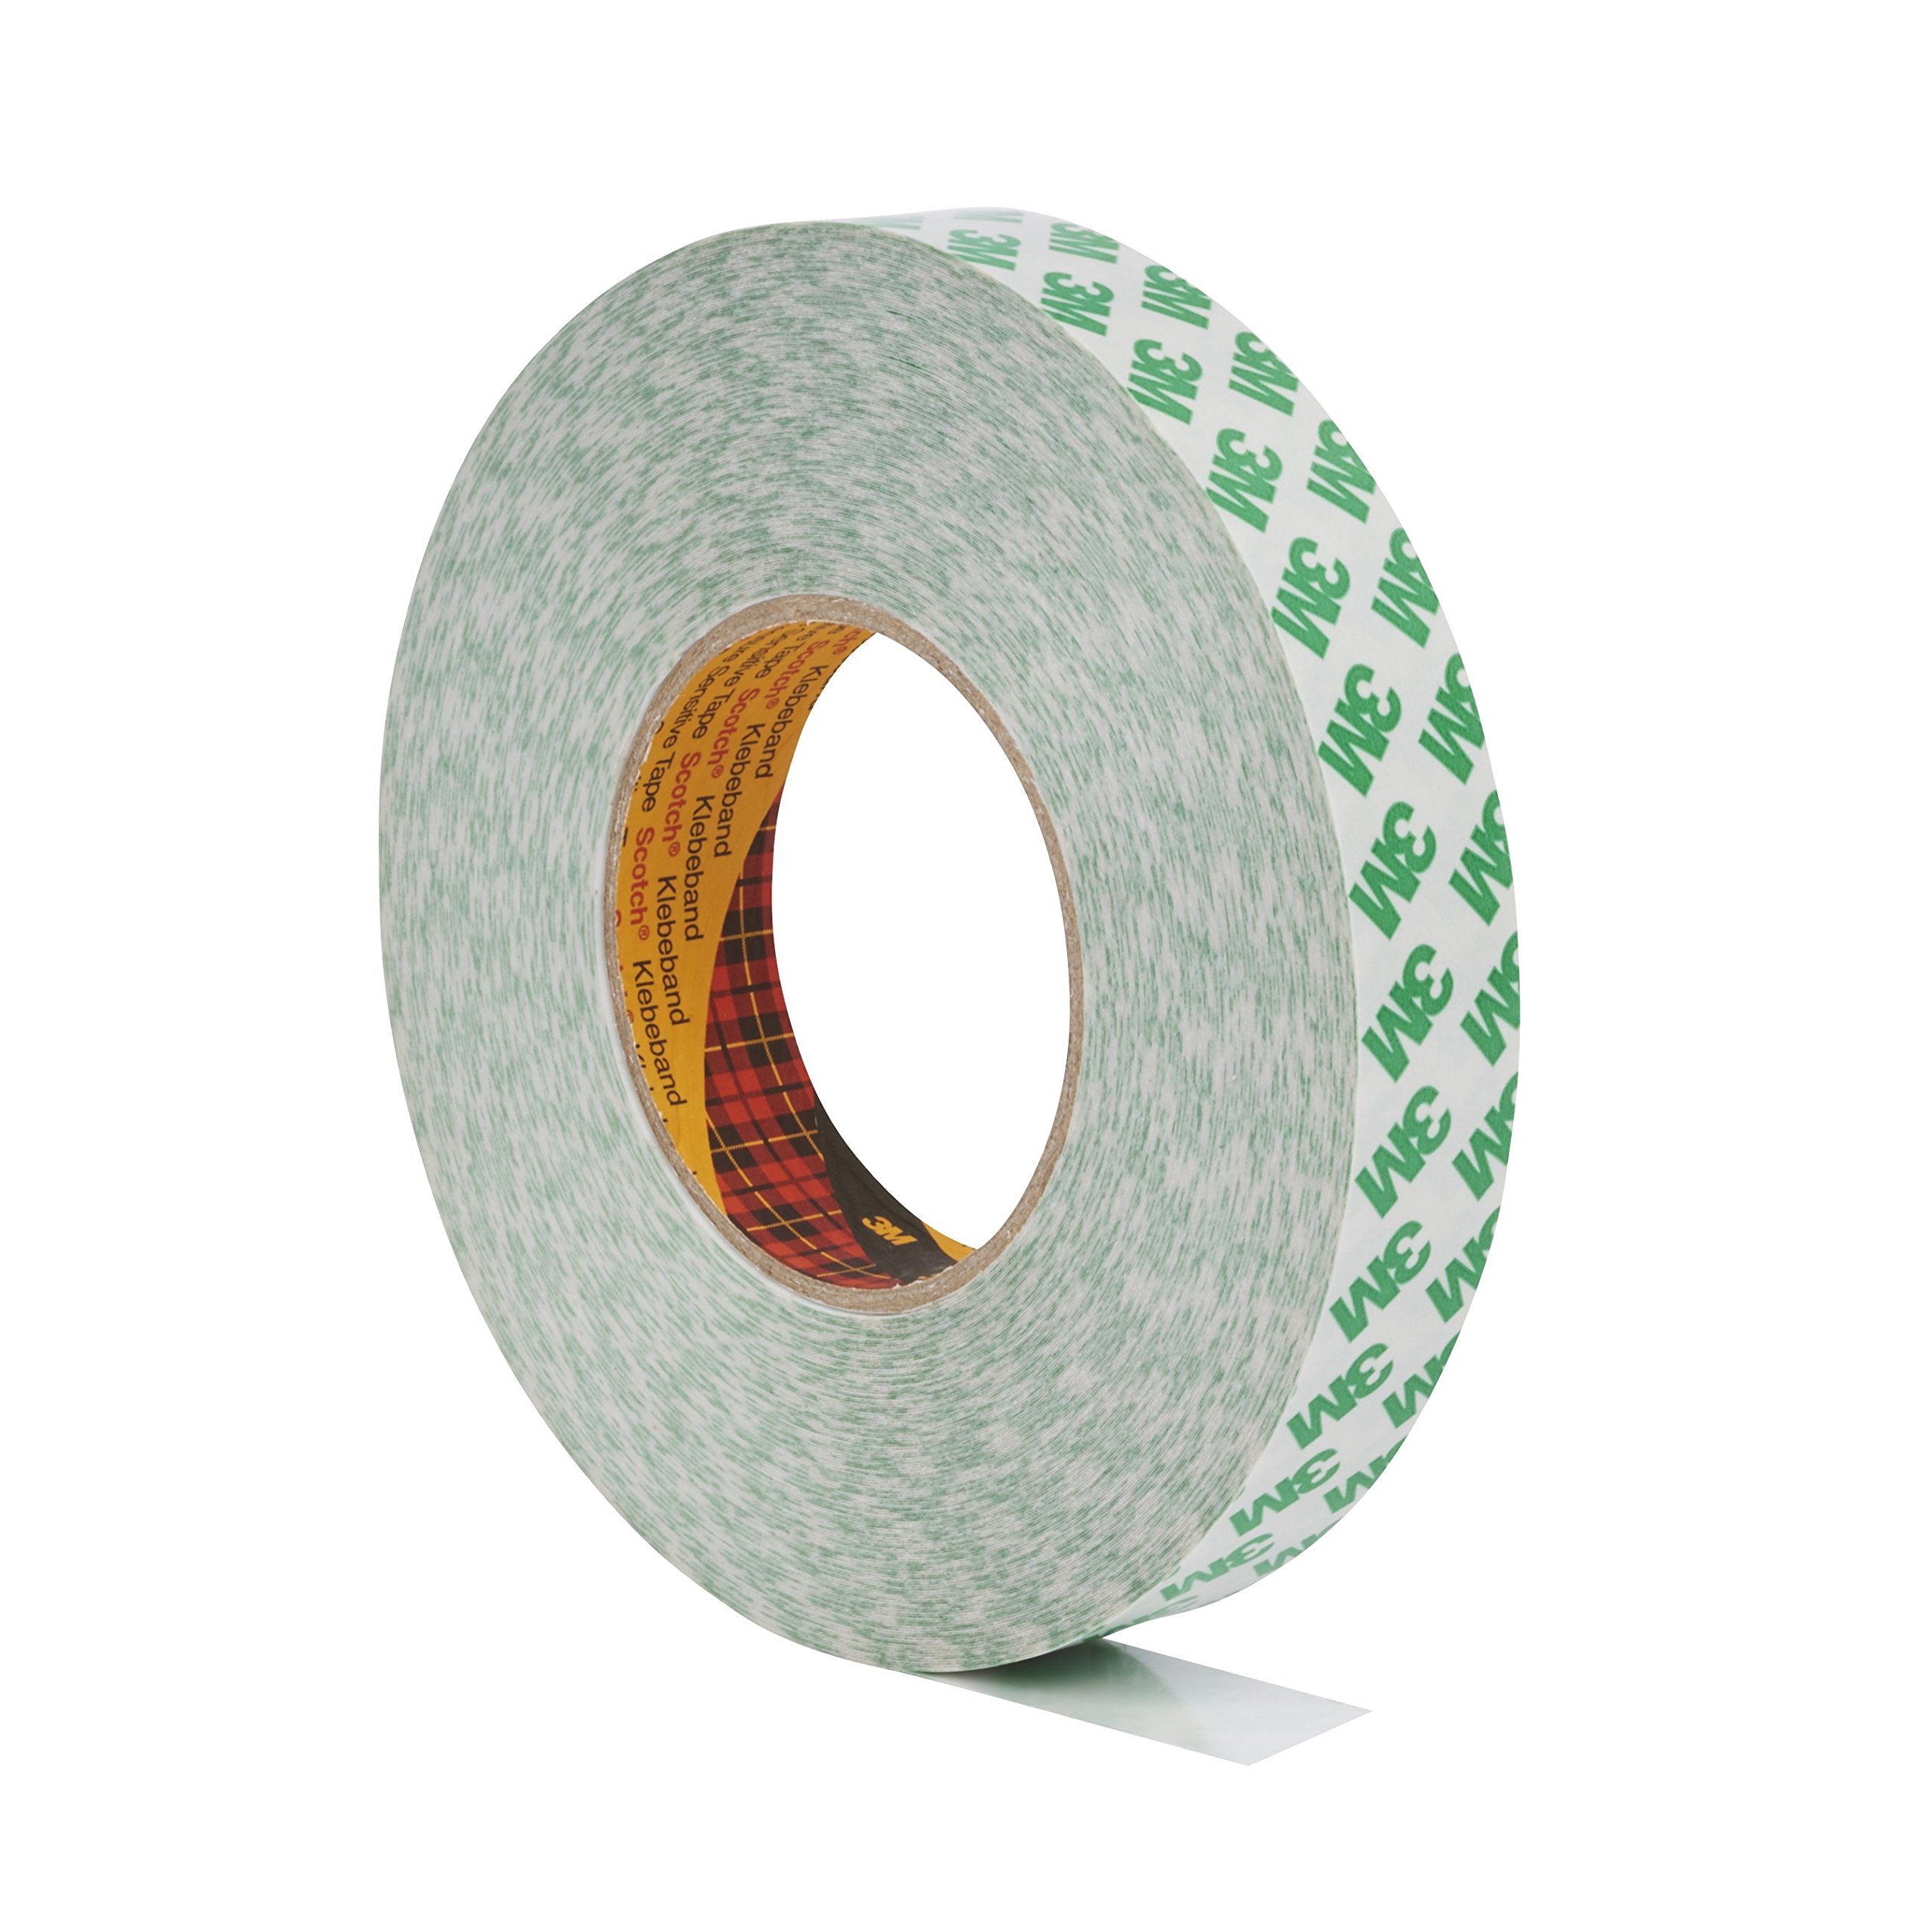 3M™ 9087 Double Coated Tape 50mm x 50m